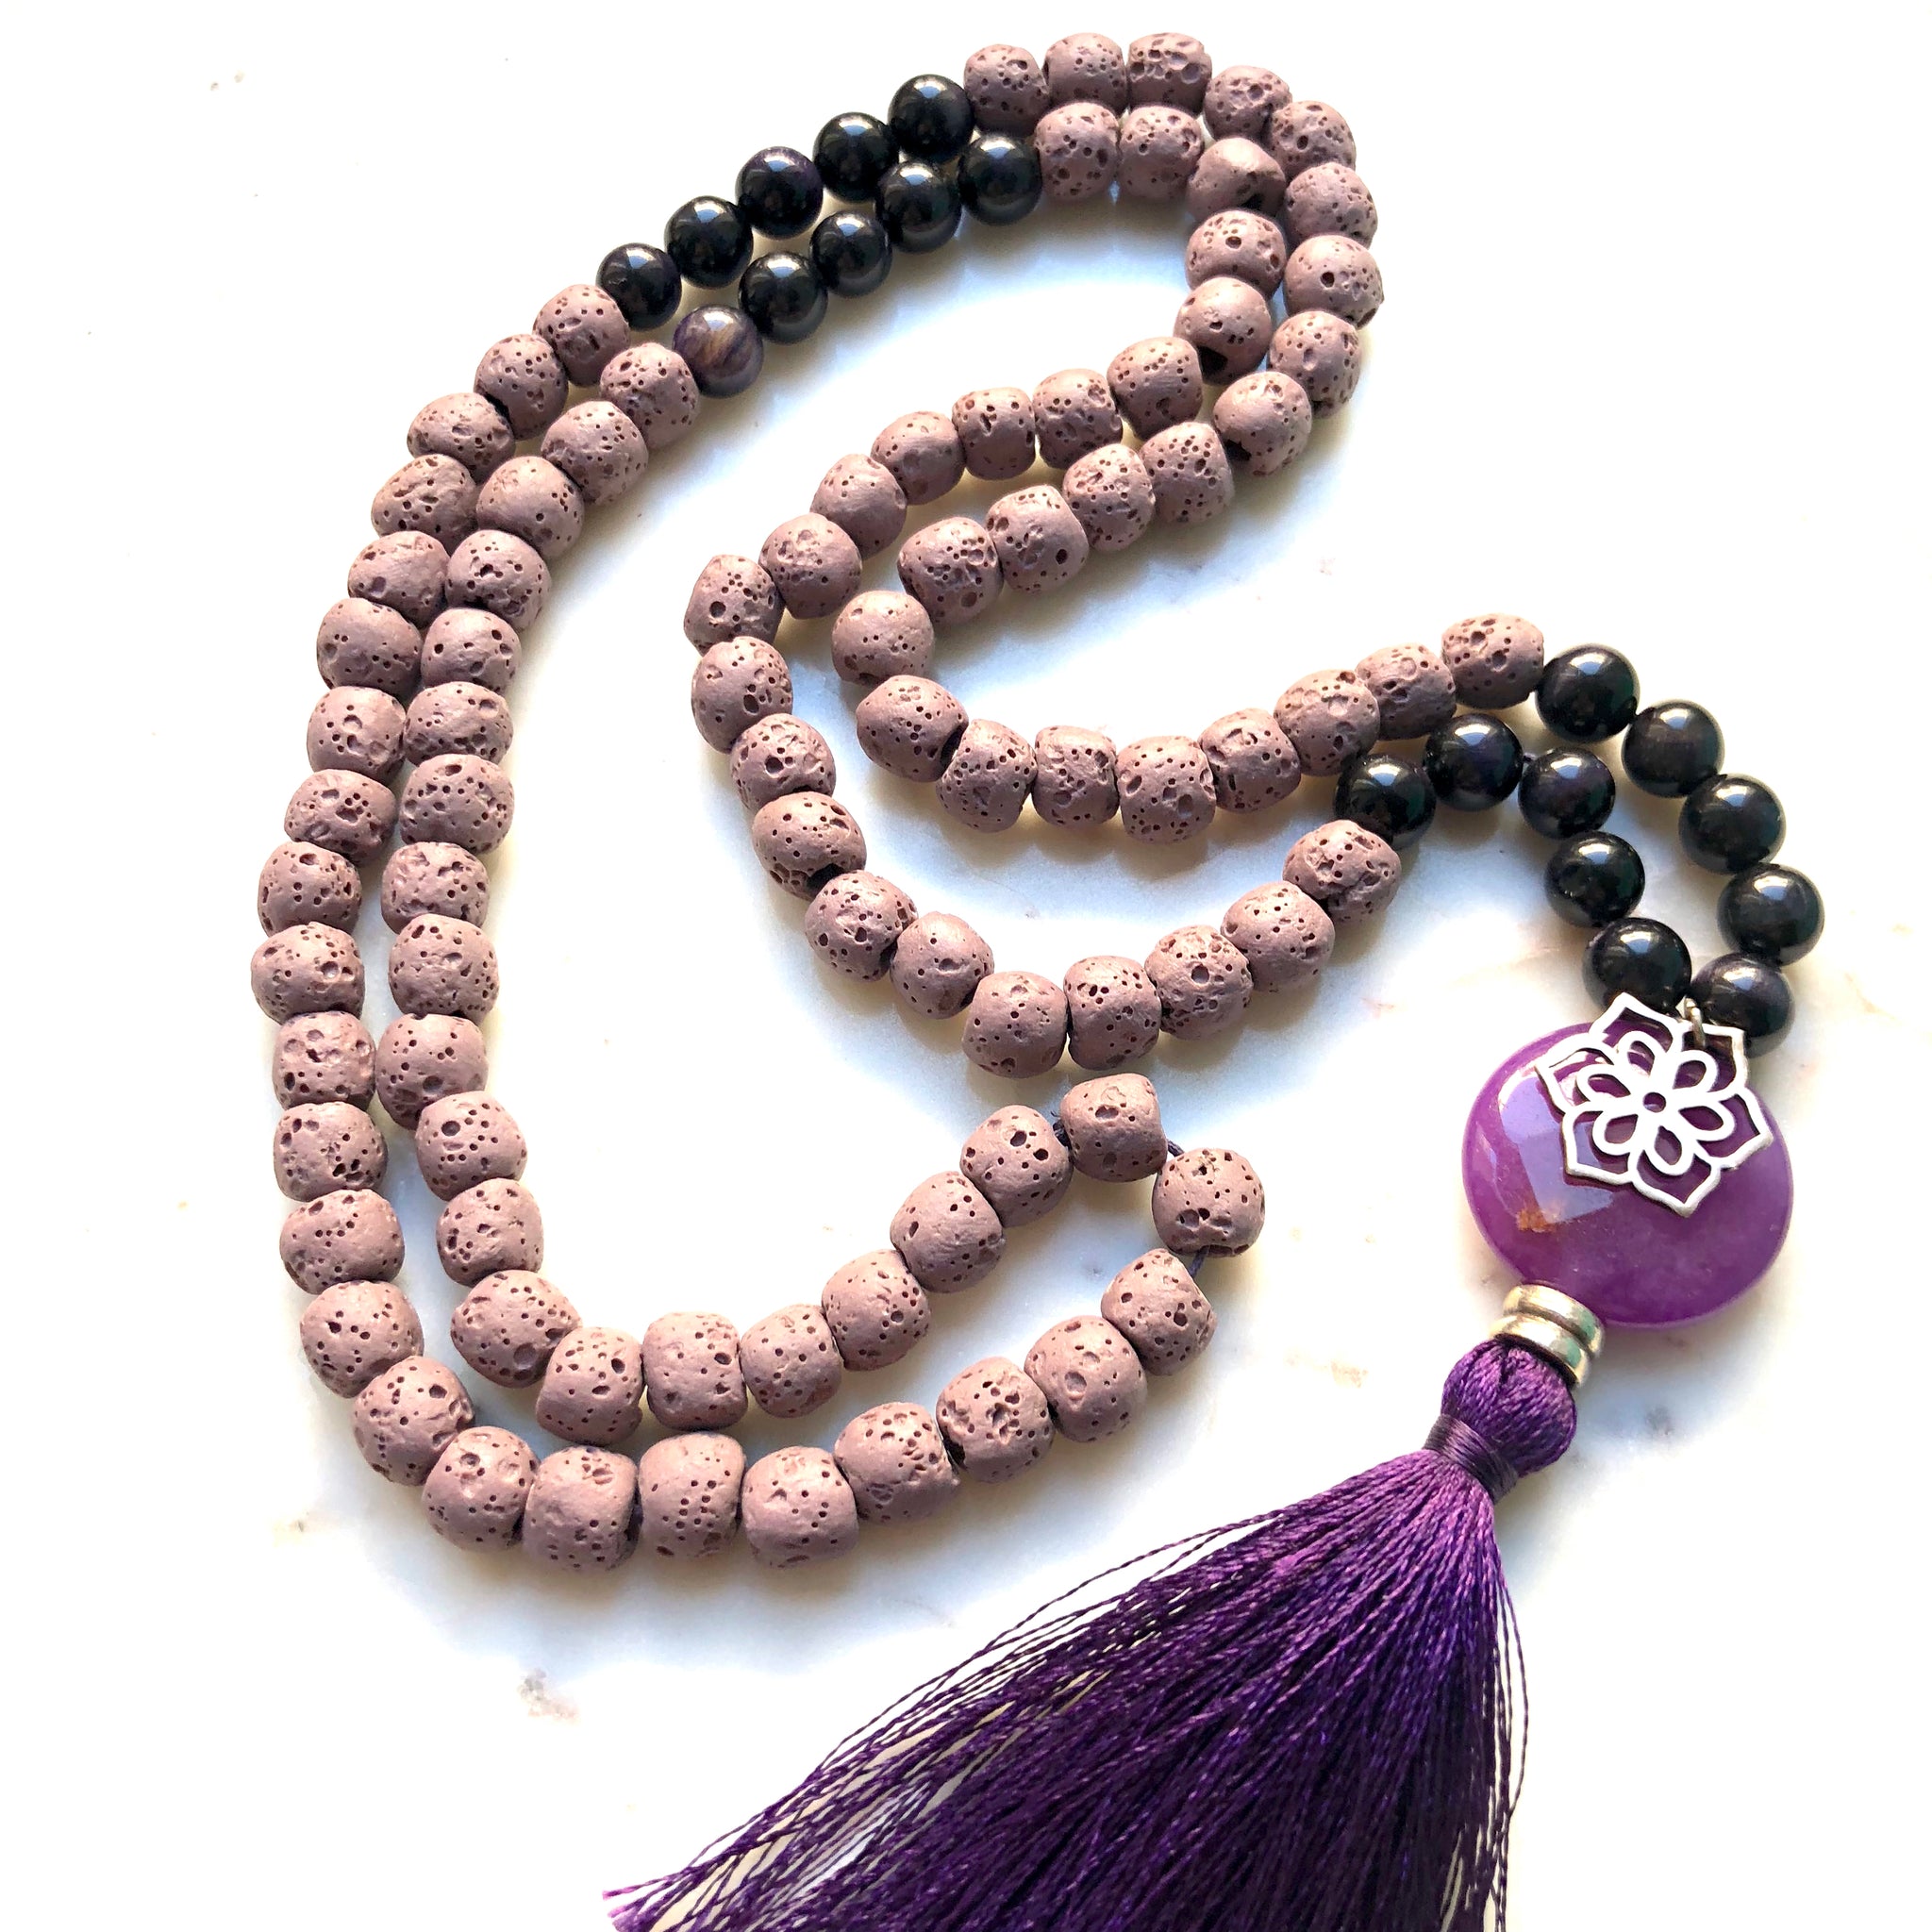 Aria Mala Atelier's unique one-of-a-kind lilac lavastone, purple jade gemstone meditation japa mala with silver mandala charm is for yoga meditation empowering spiritual daily practise and intention setting